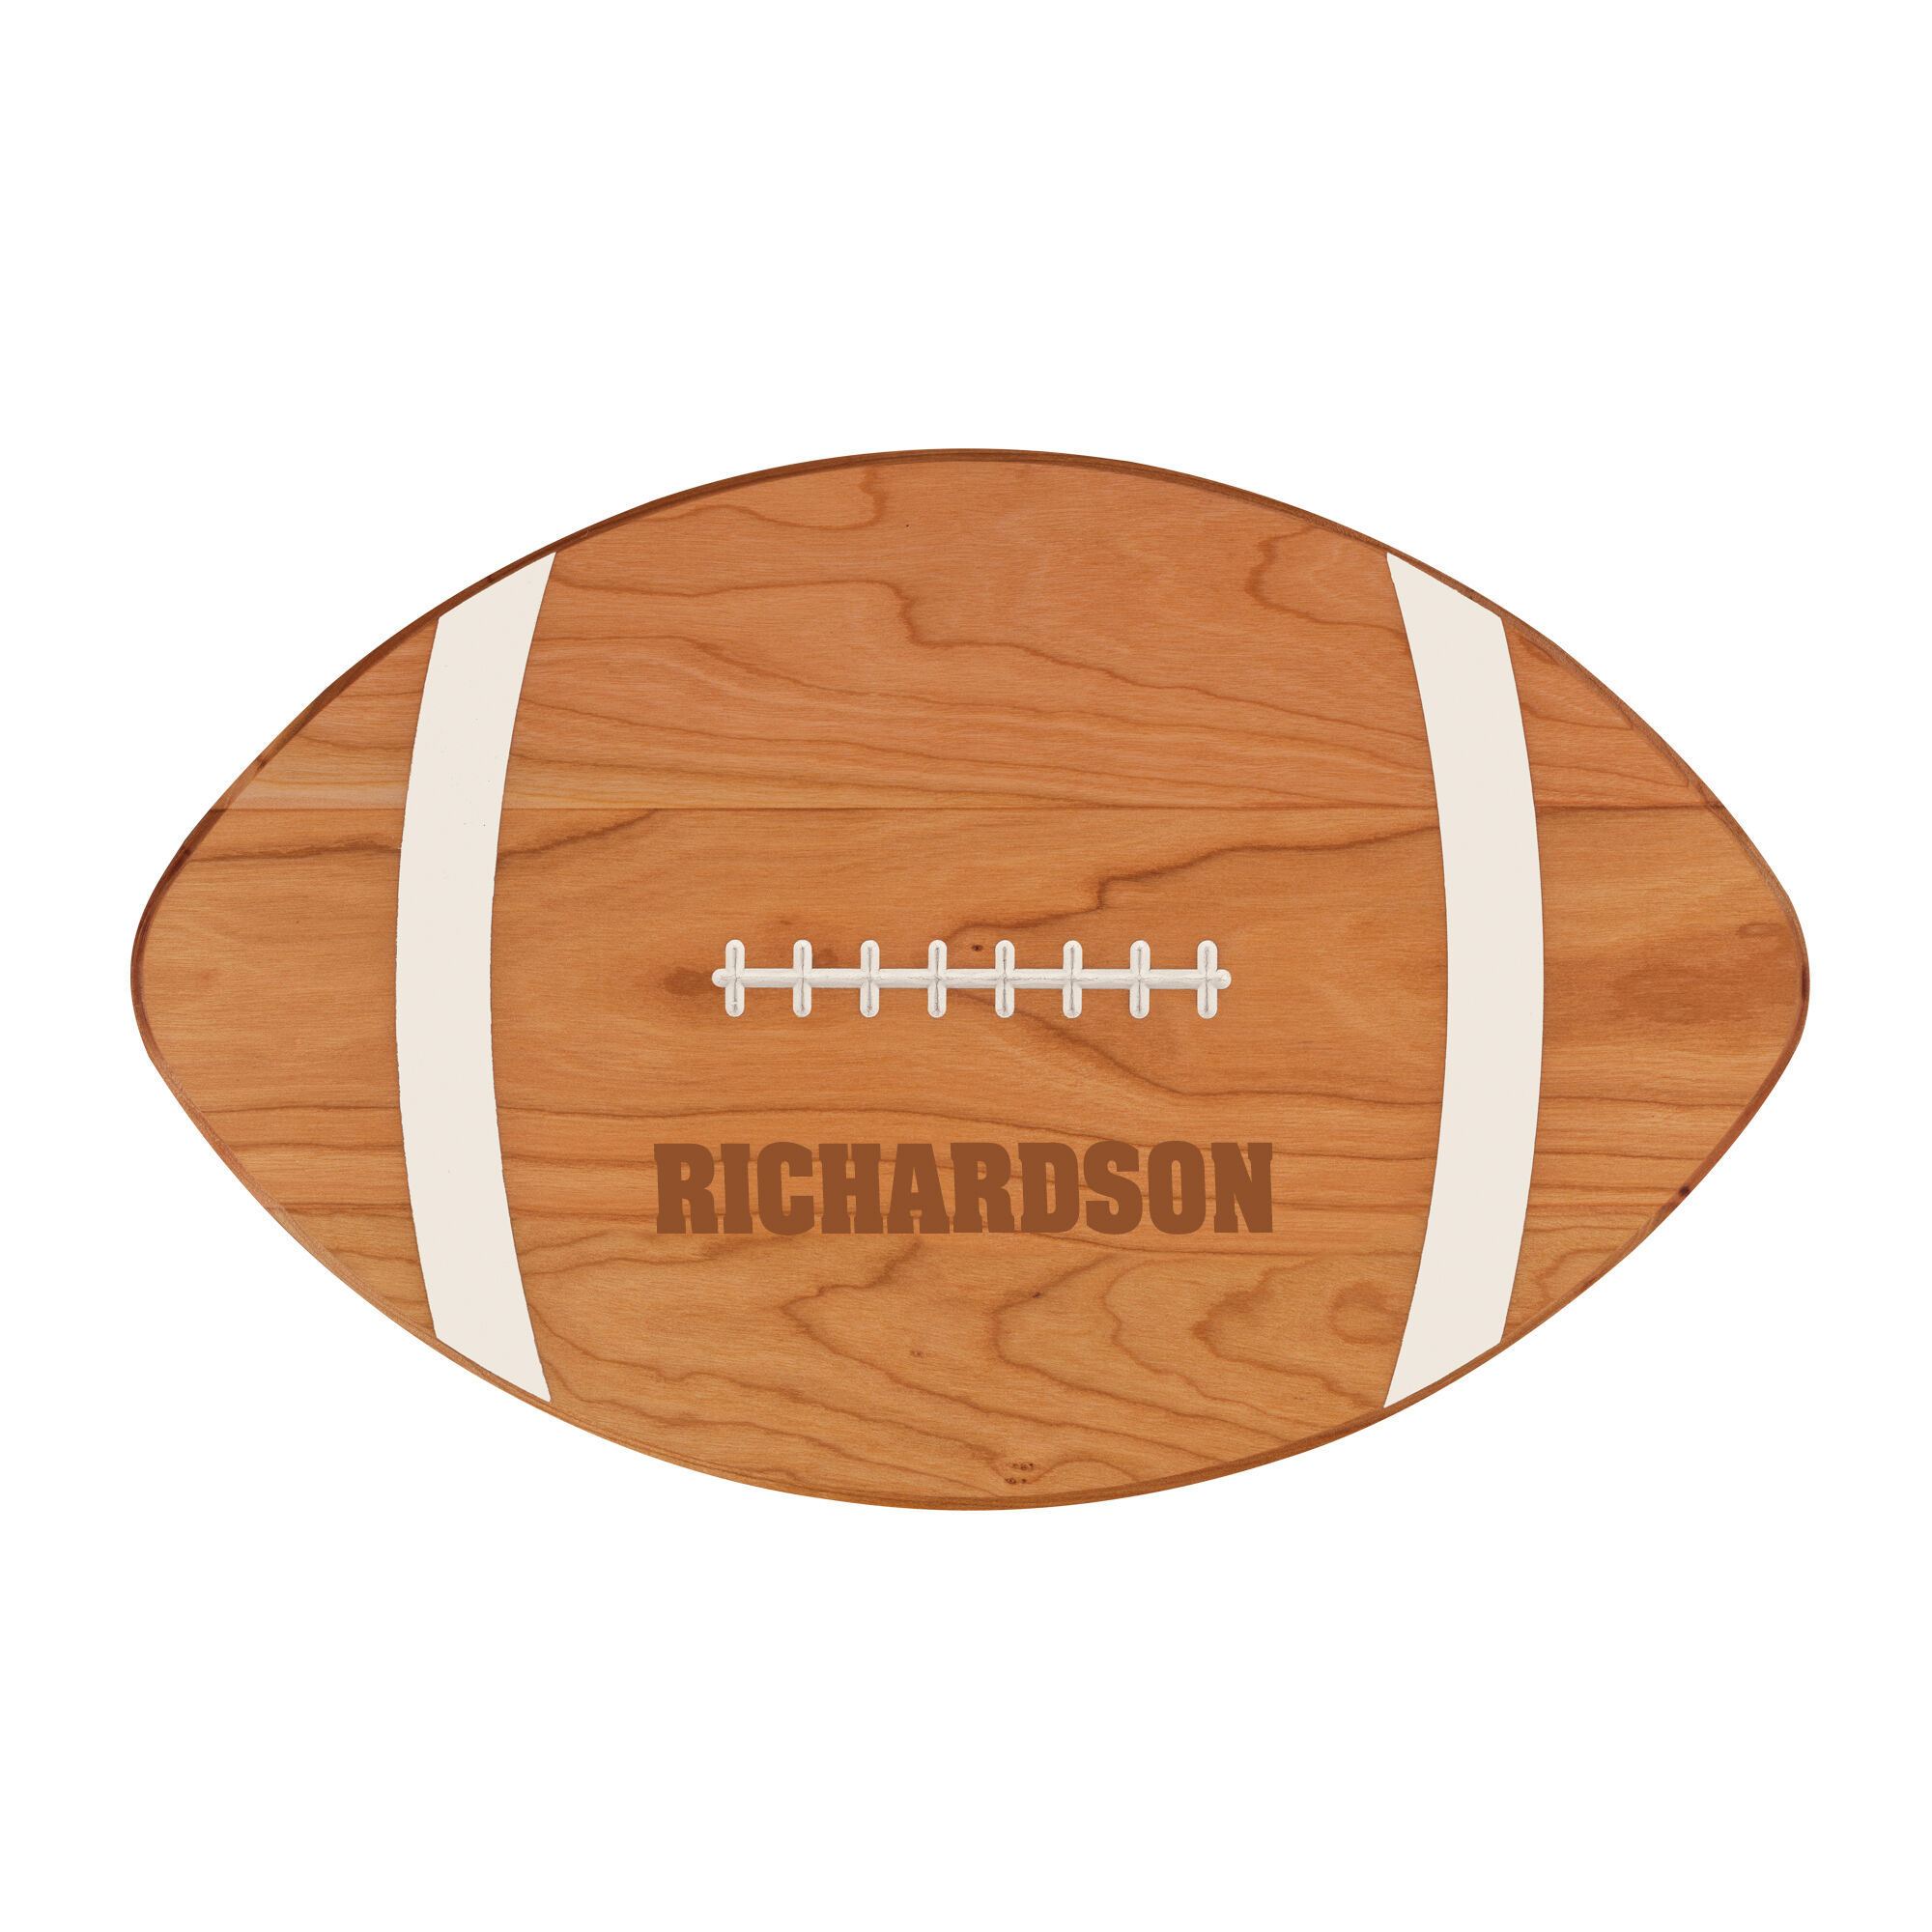 The Personalized Football Serving Board 5610 0019 a main